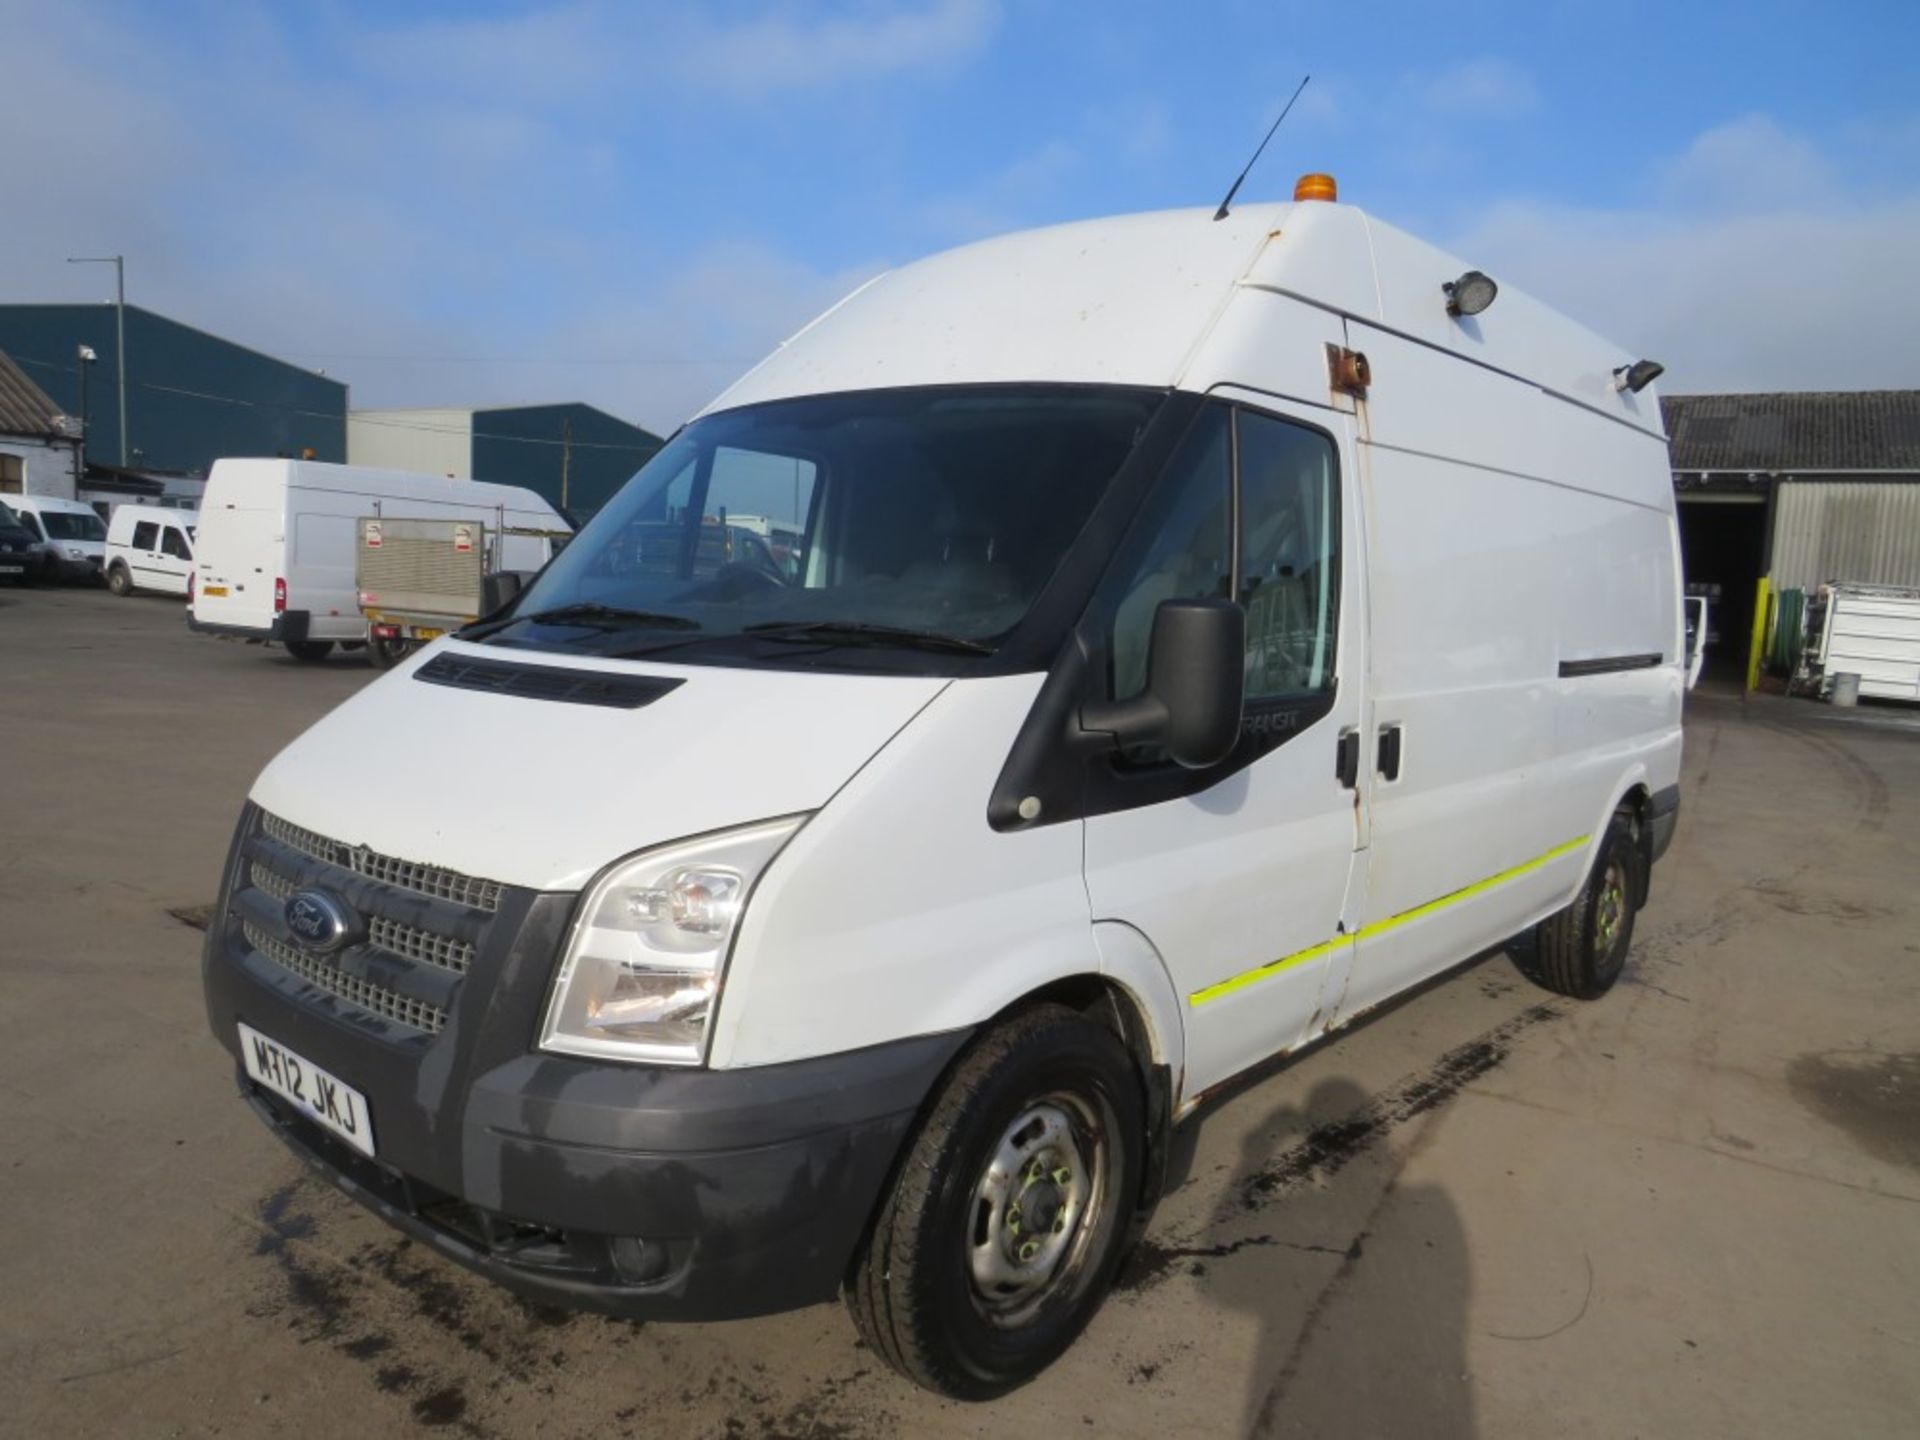 12 reg FORD TRANSIT 125 T350 RWD (DIRECT ELECTRICITY NW) 1ST REG 07/12, 99346M, V5 HERE, 1 OWNER - Image 2 of 7